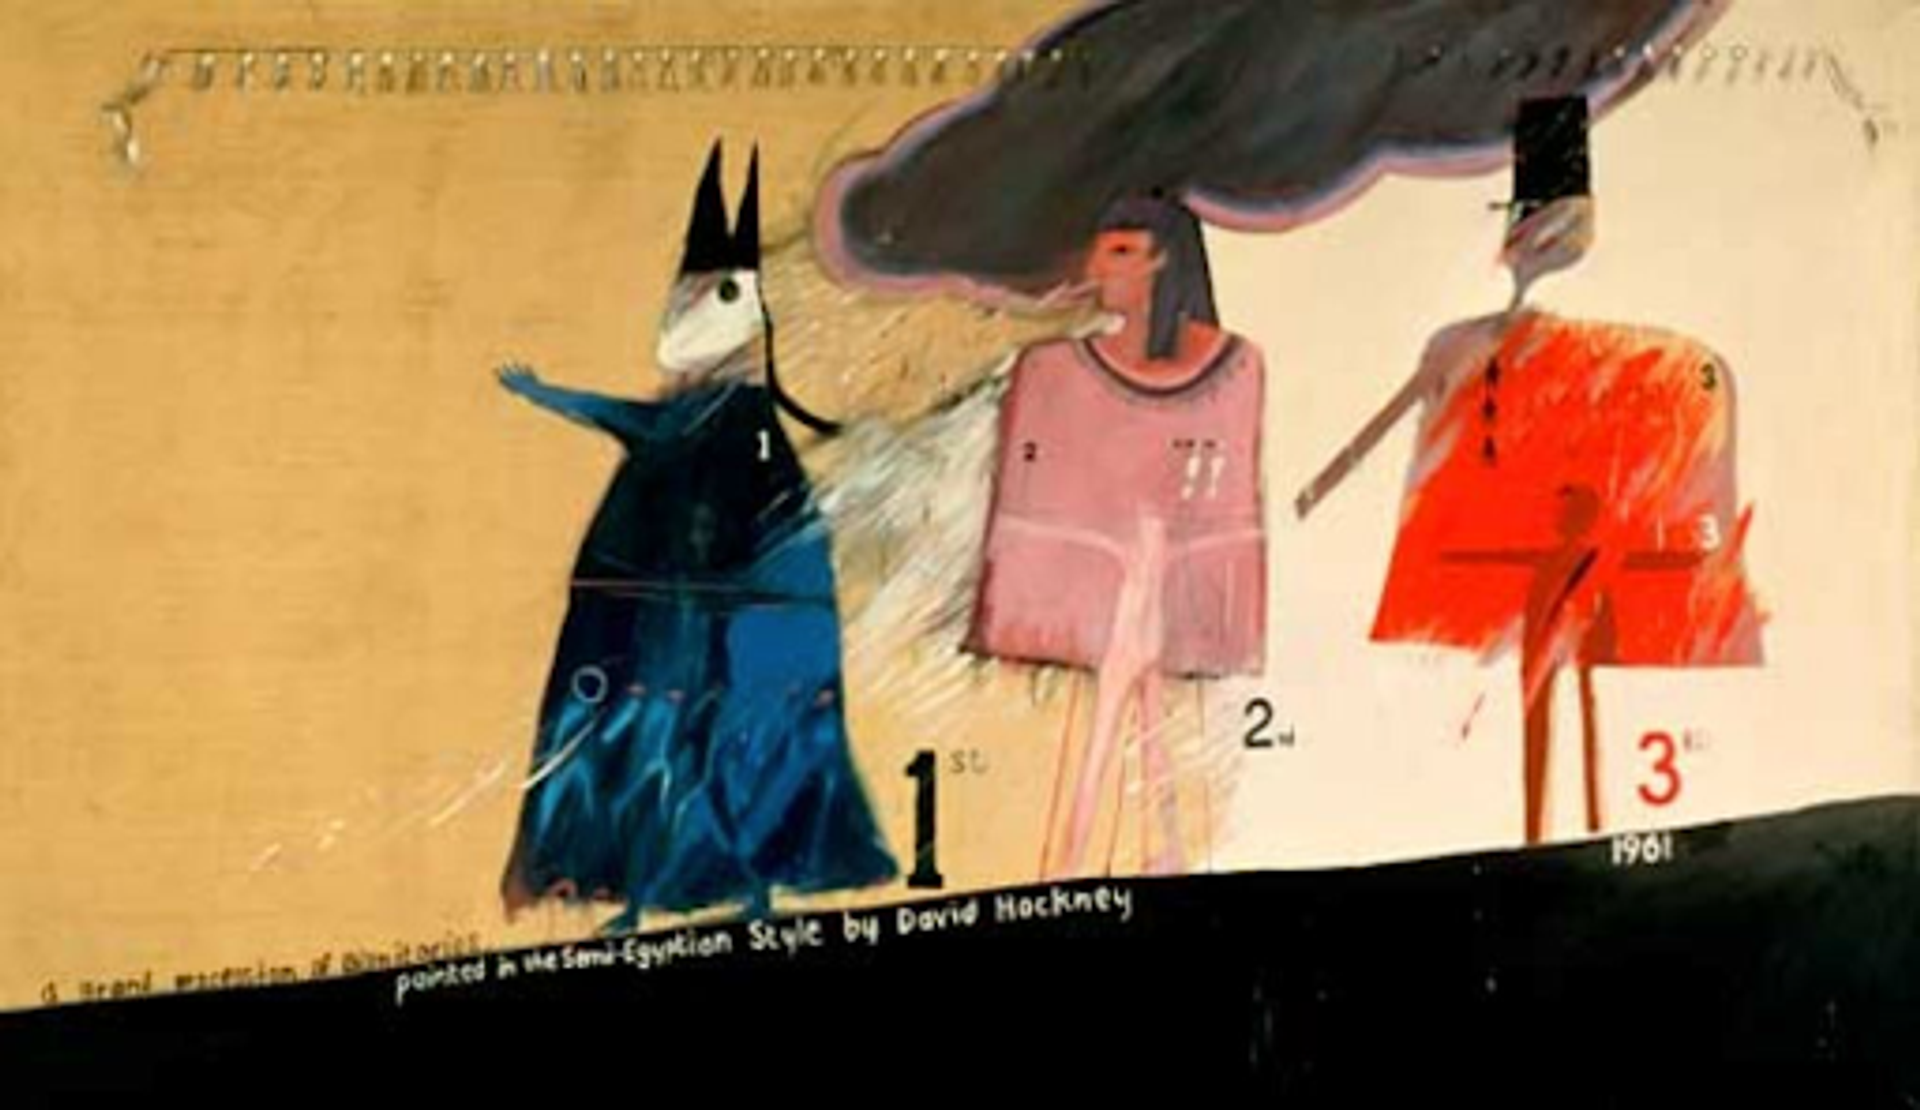 David Hockney's A Grand Procession of Dignitaries in the Semi-Egyptian Style. Three characters, one in blue, pink, and red, walking downhill. 